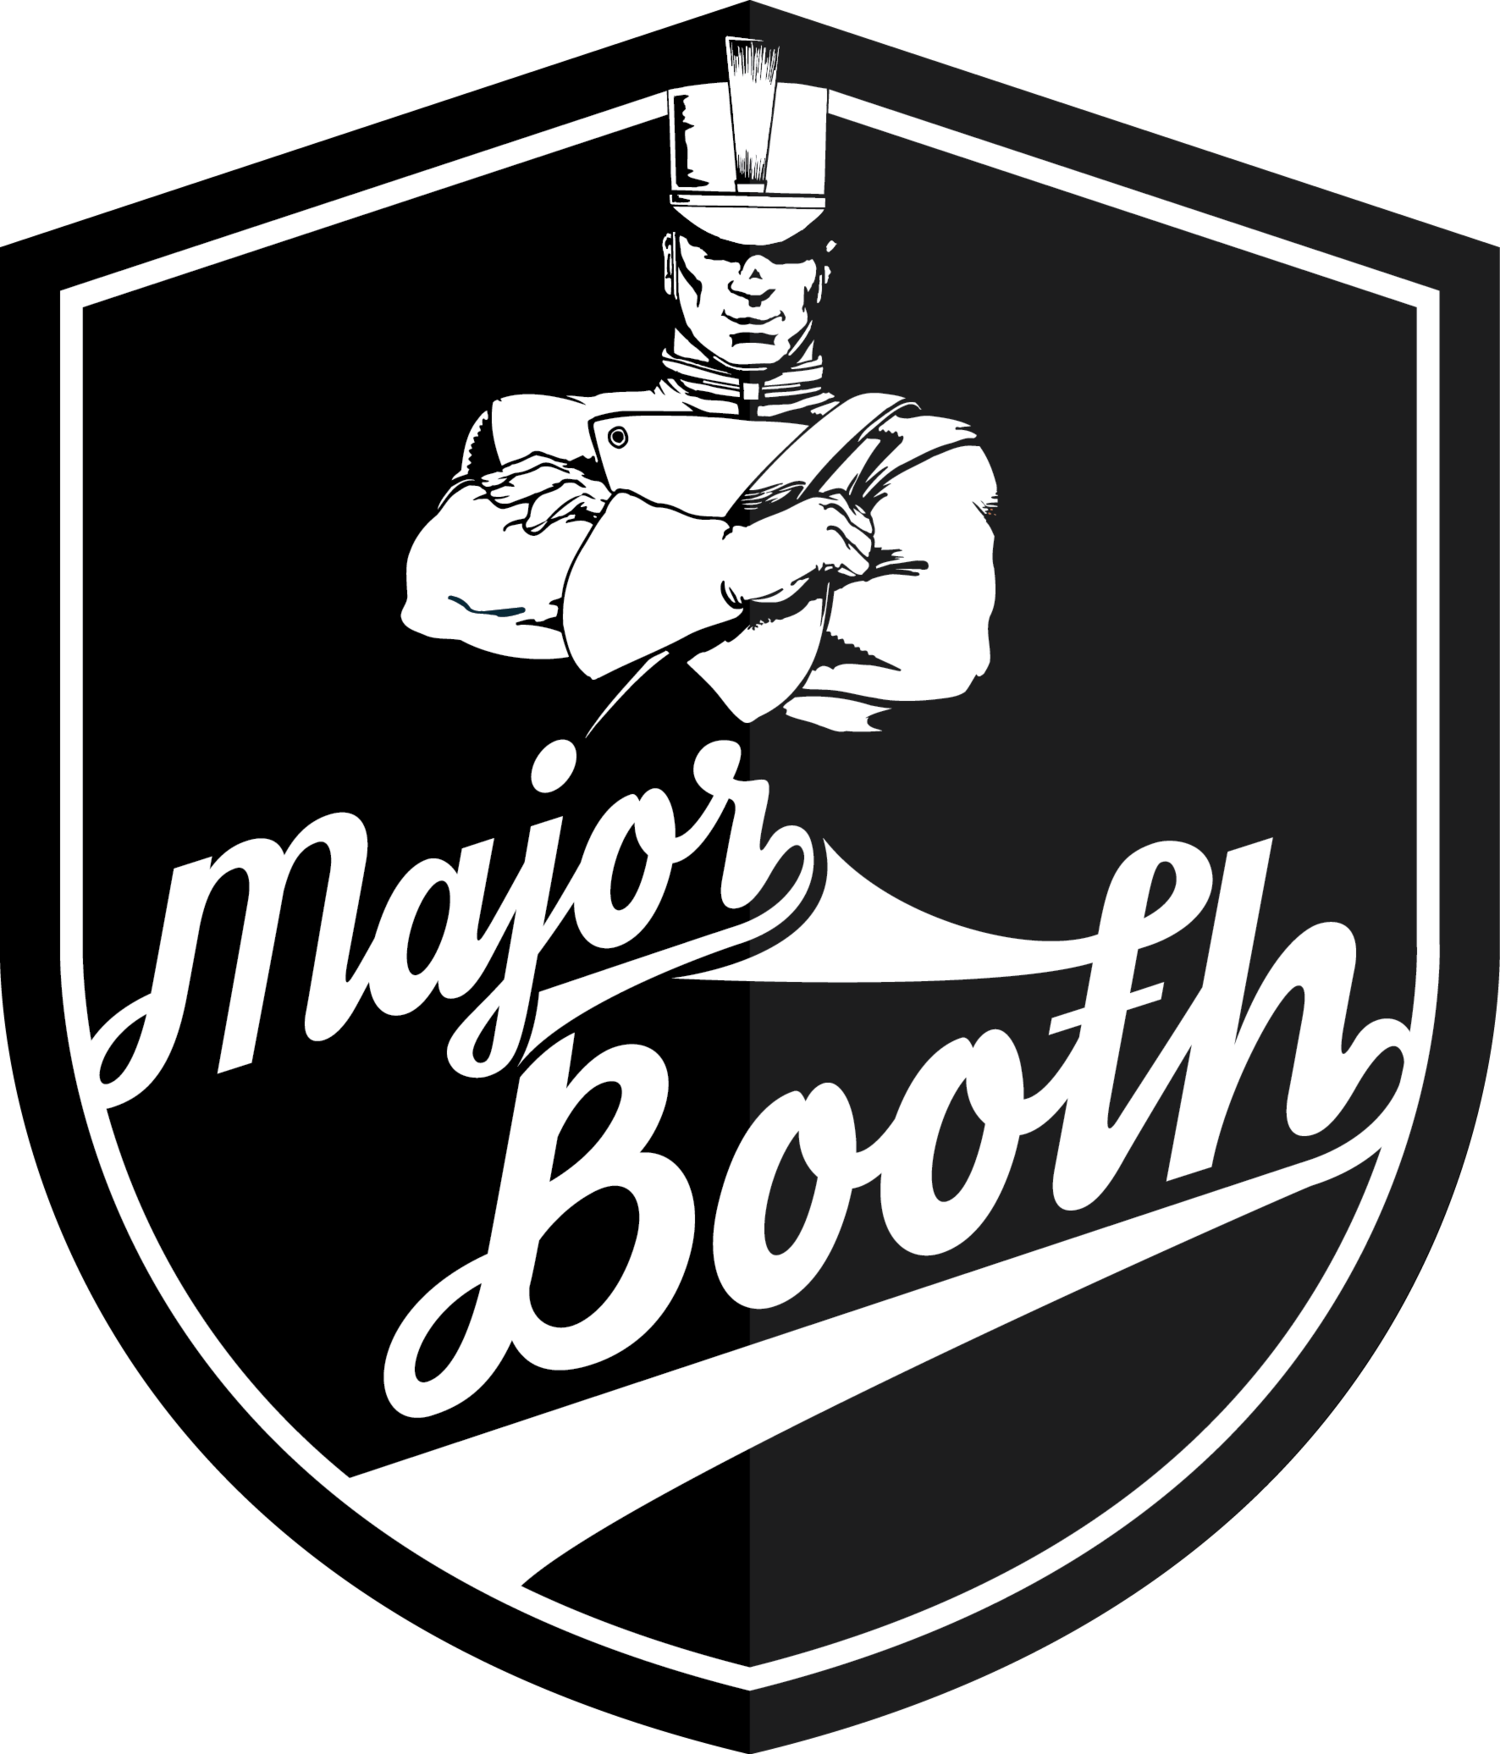 Major Booth